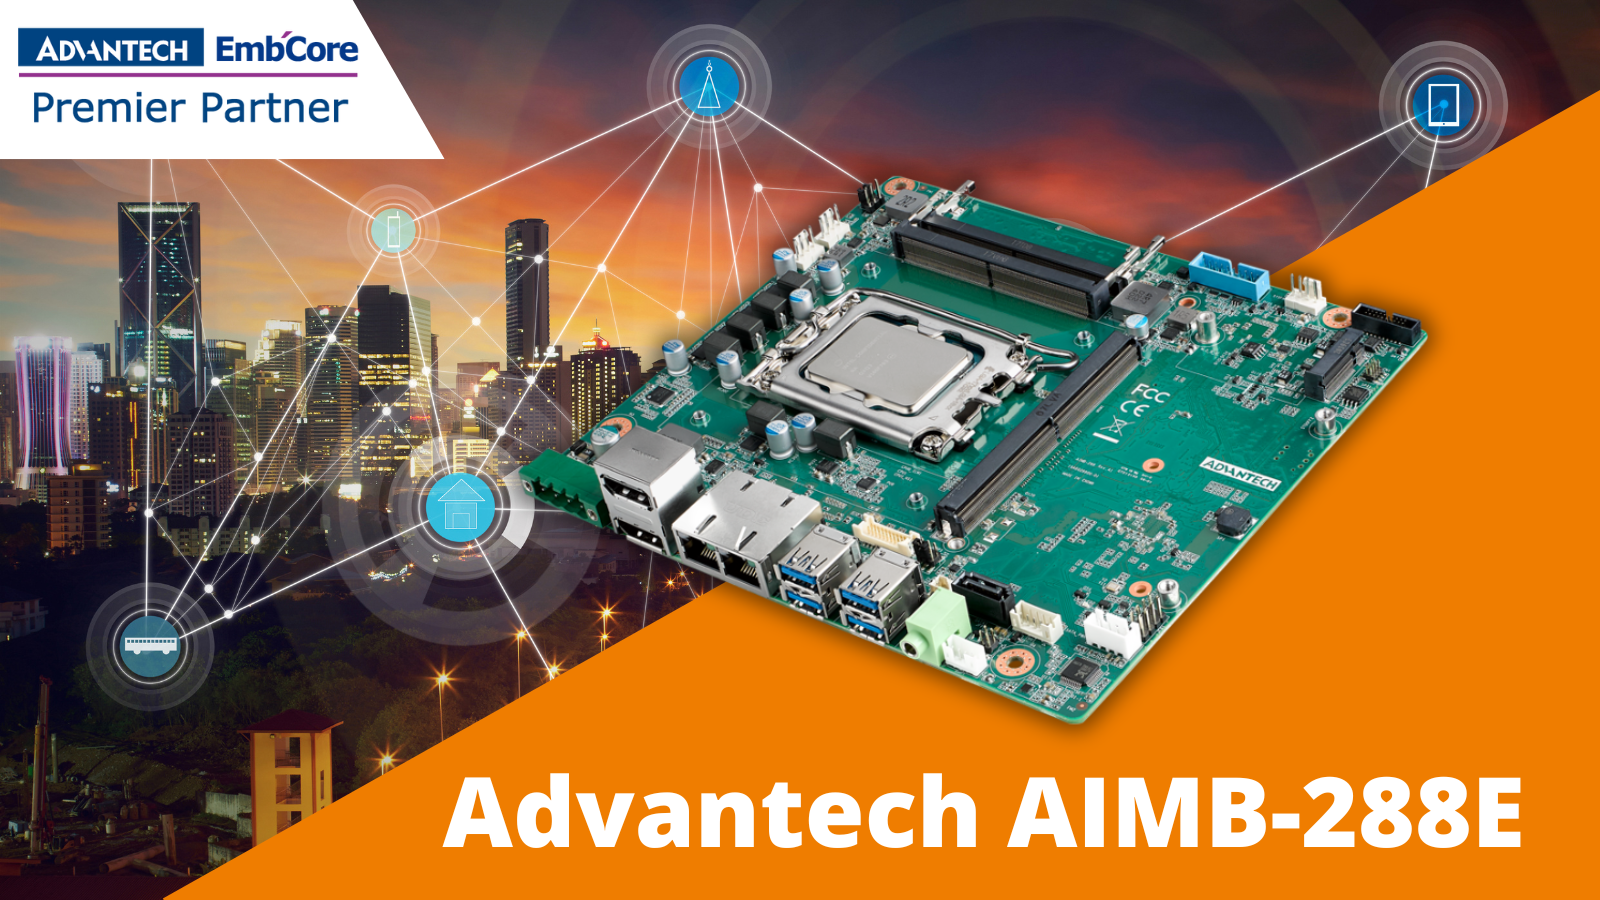 You are currently viewing Advantech Embedded Motherboard AIMB-288E with NVIDIA RTX Quadro T1000